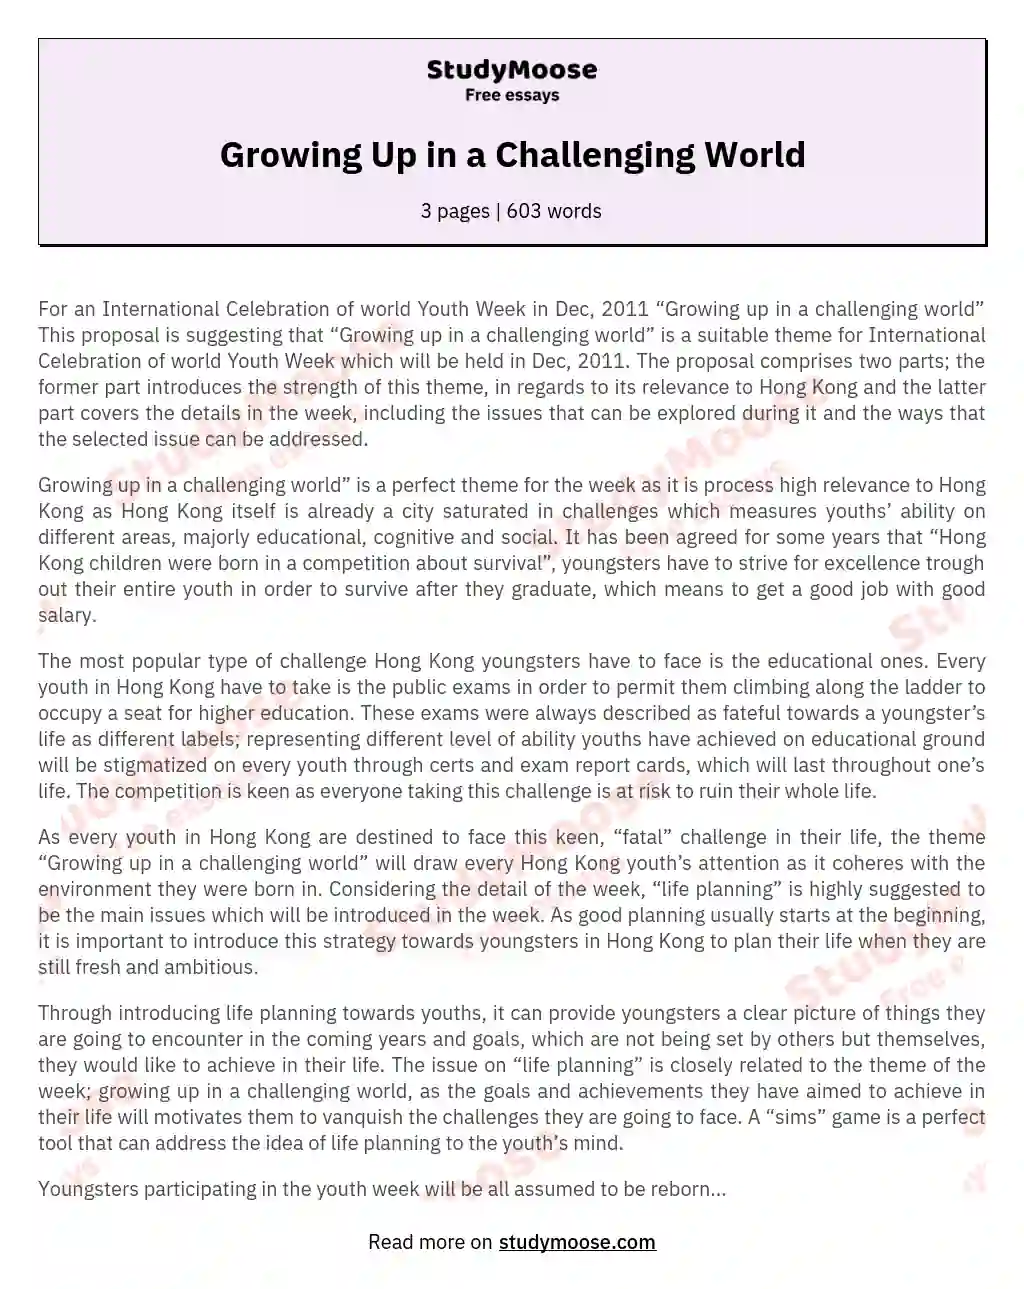 Growing Up in a Challenging World essay